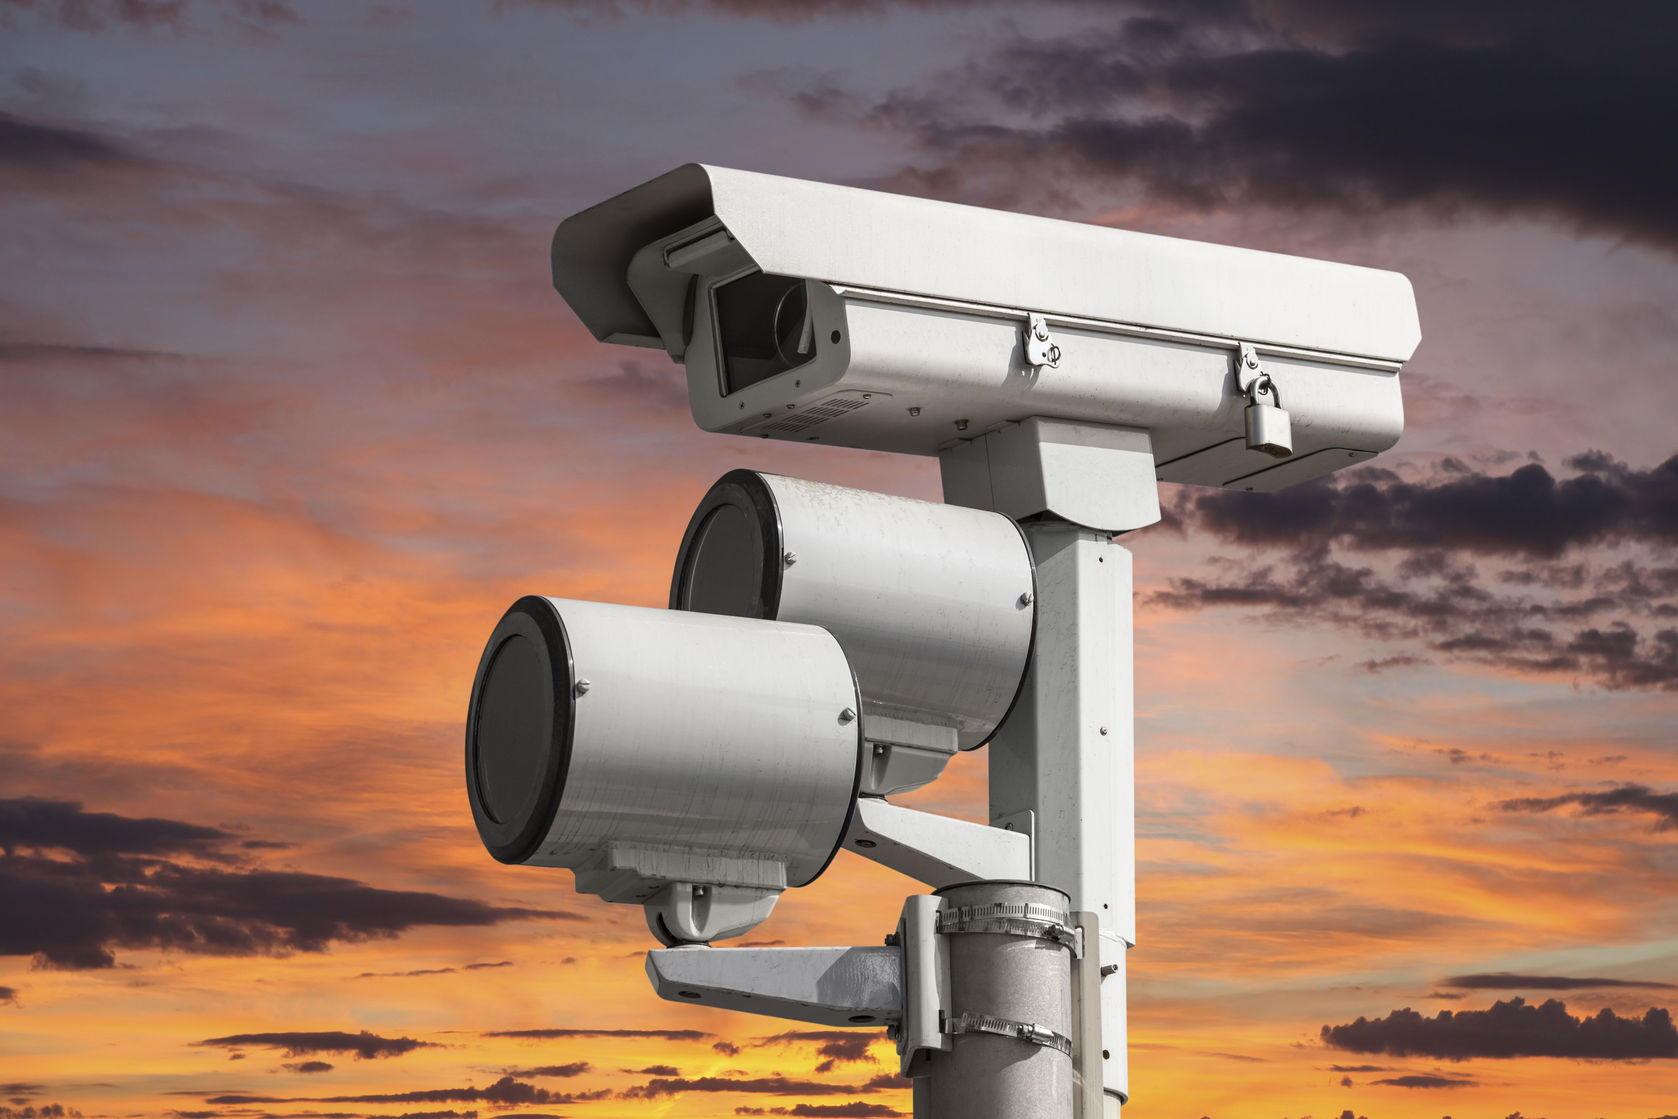 Ohio’s High Court Again Upholds Cities’ Use of Traffic Cameras